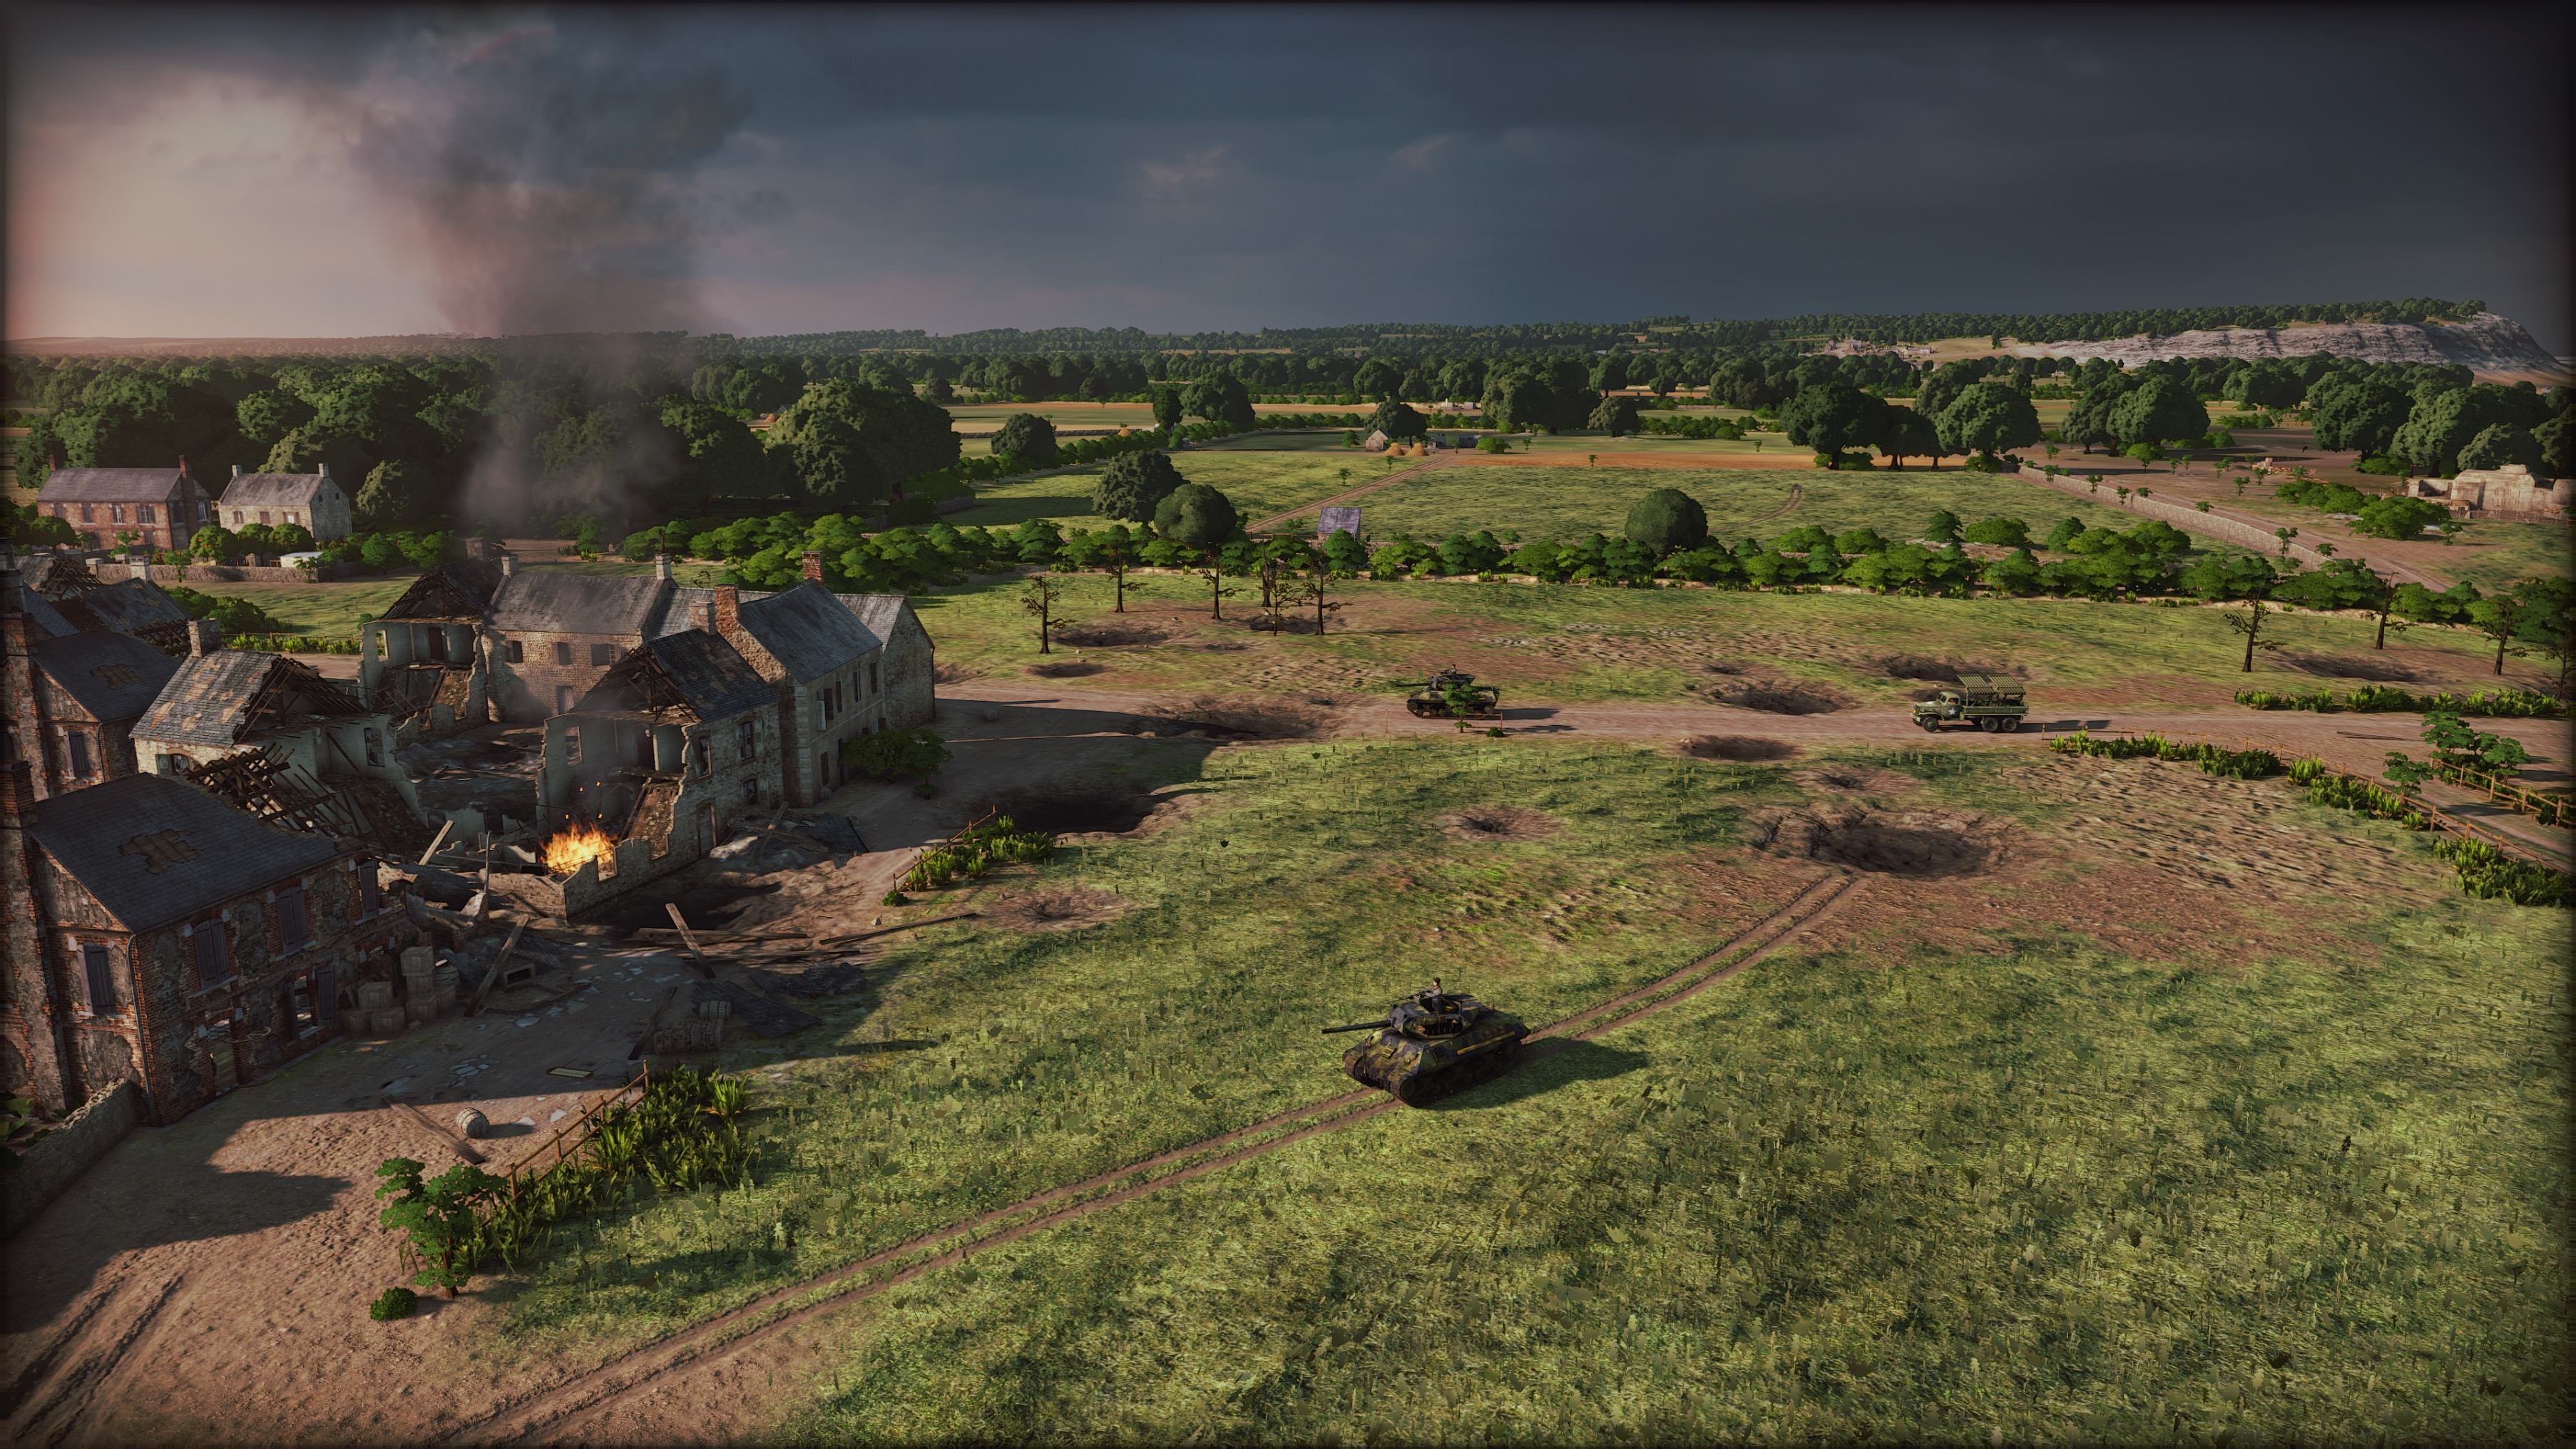 download free steel division normandy 44 ps4